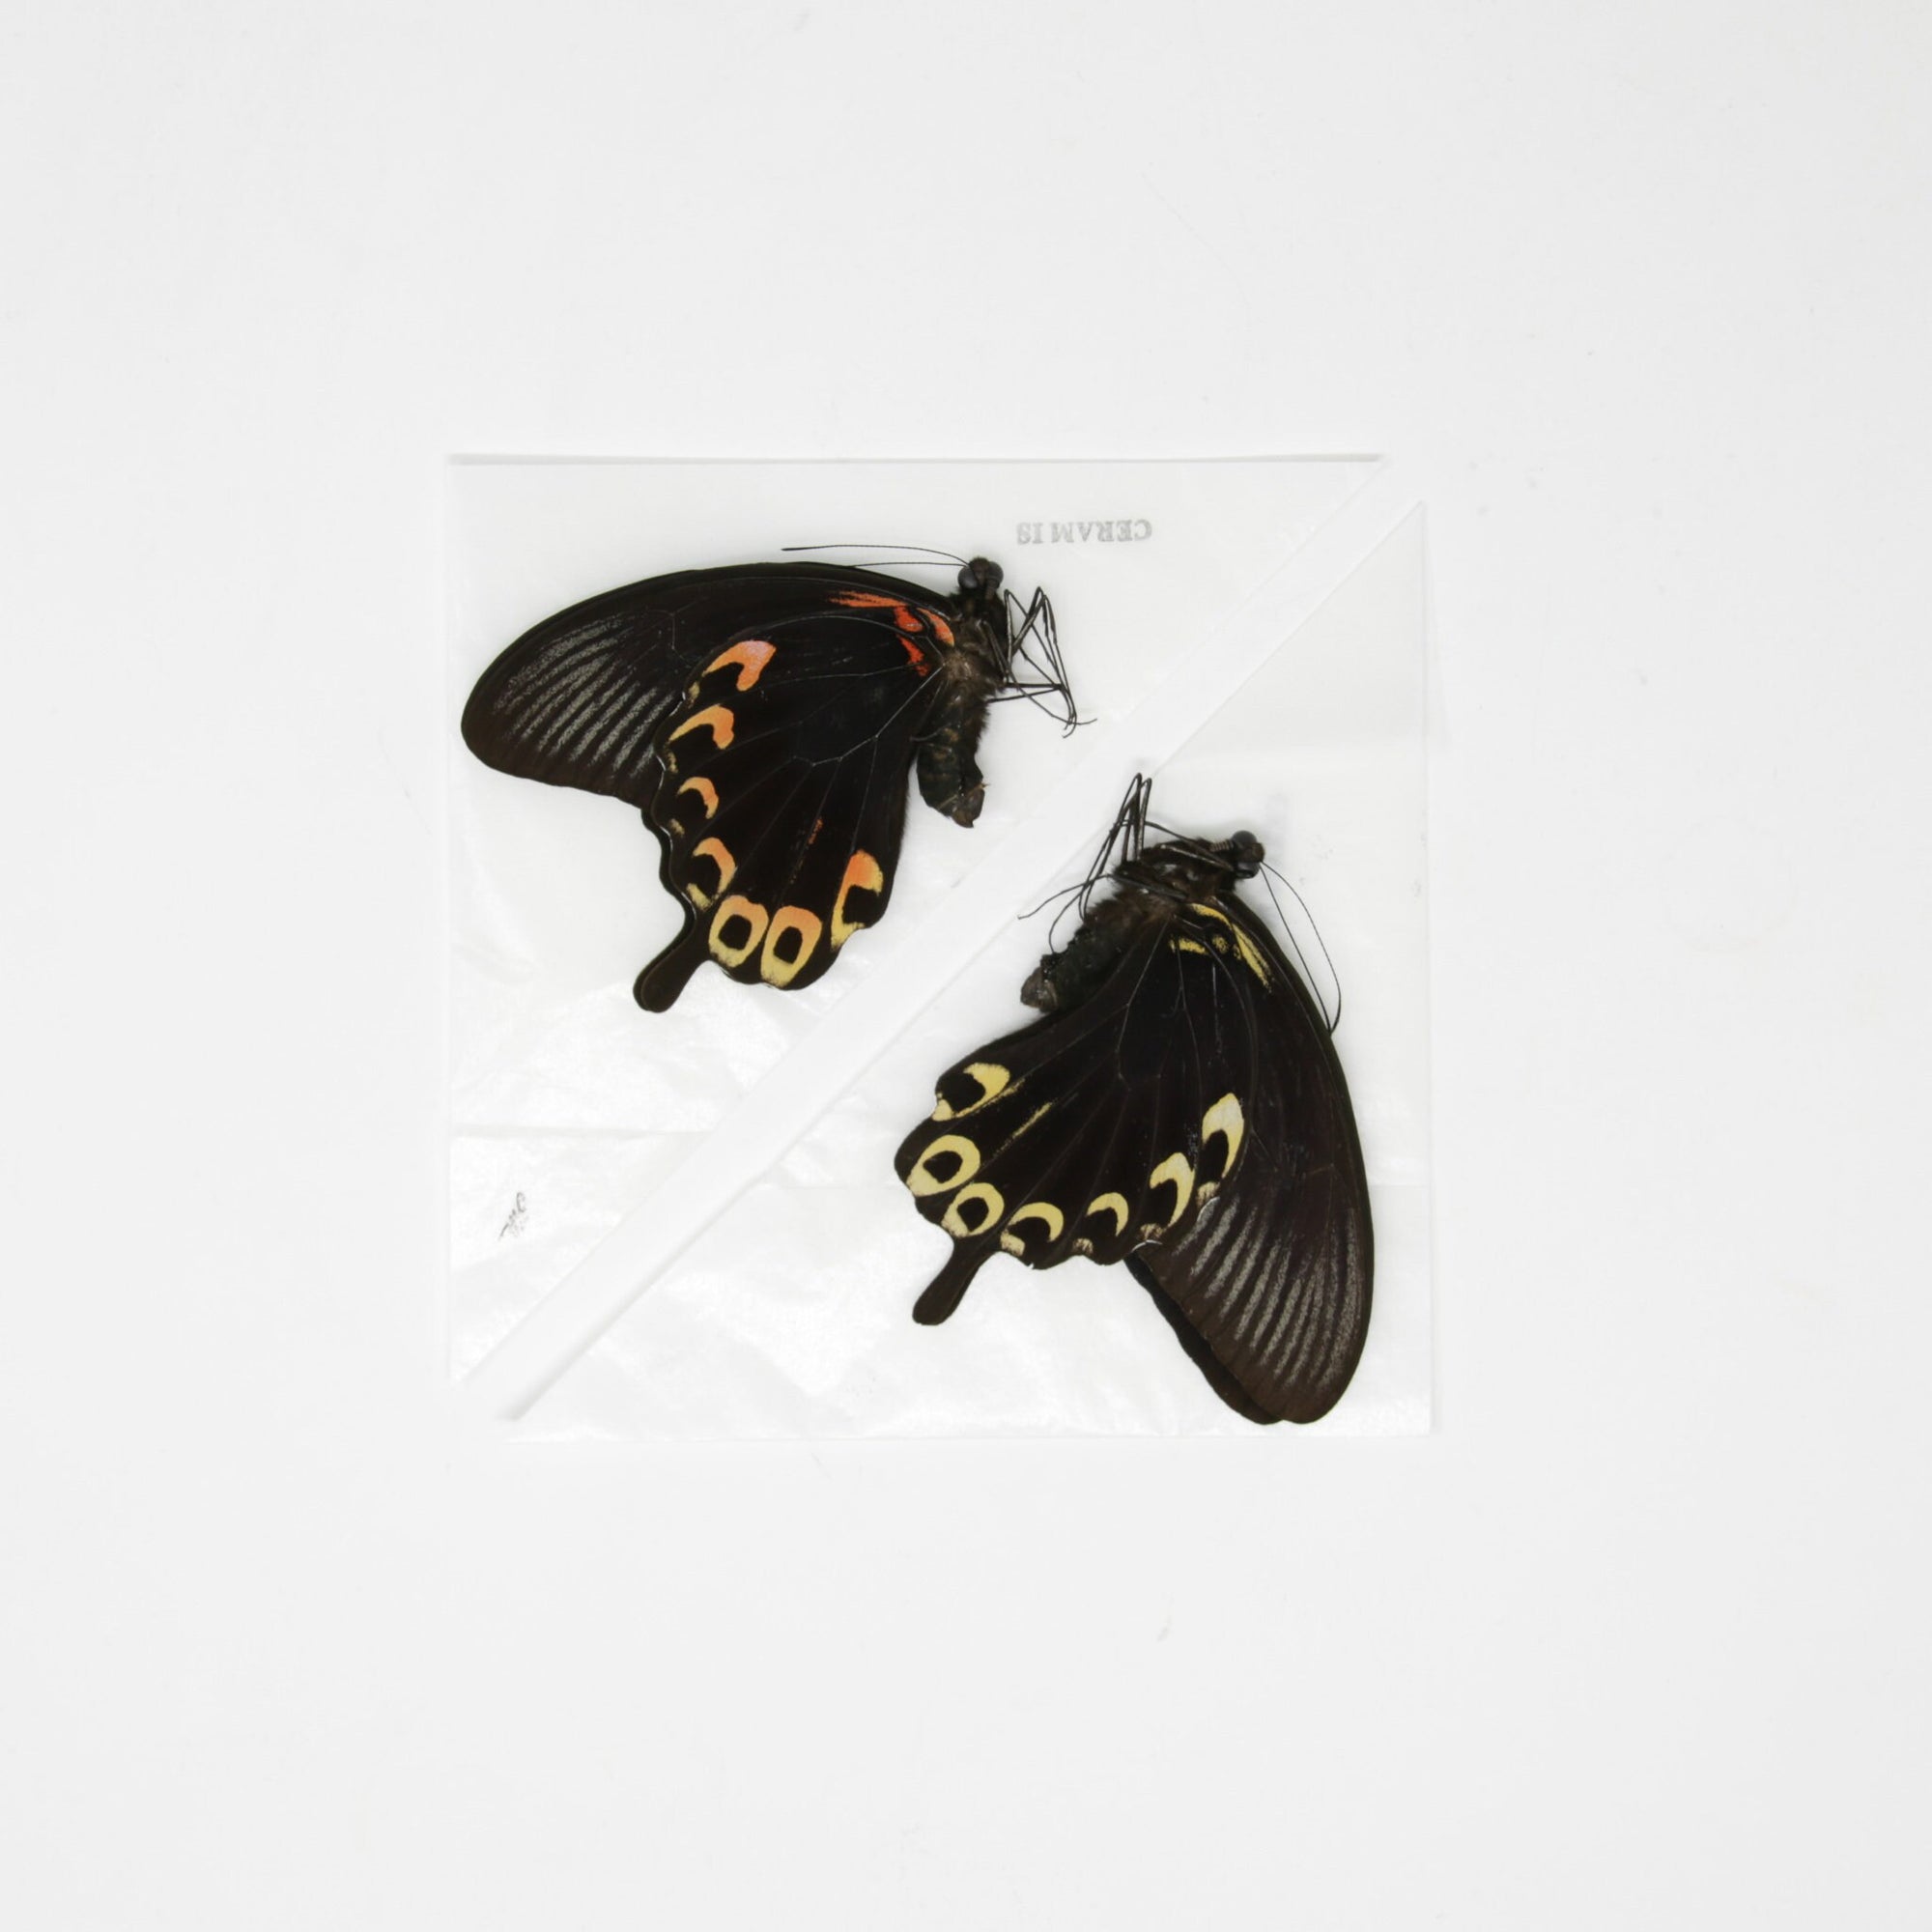 2 x The Scarlet Mormon | Papilio deiphobus A1- | Unmounted Papered Butterfly Entomology Specimens